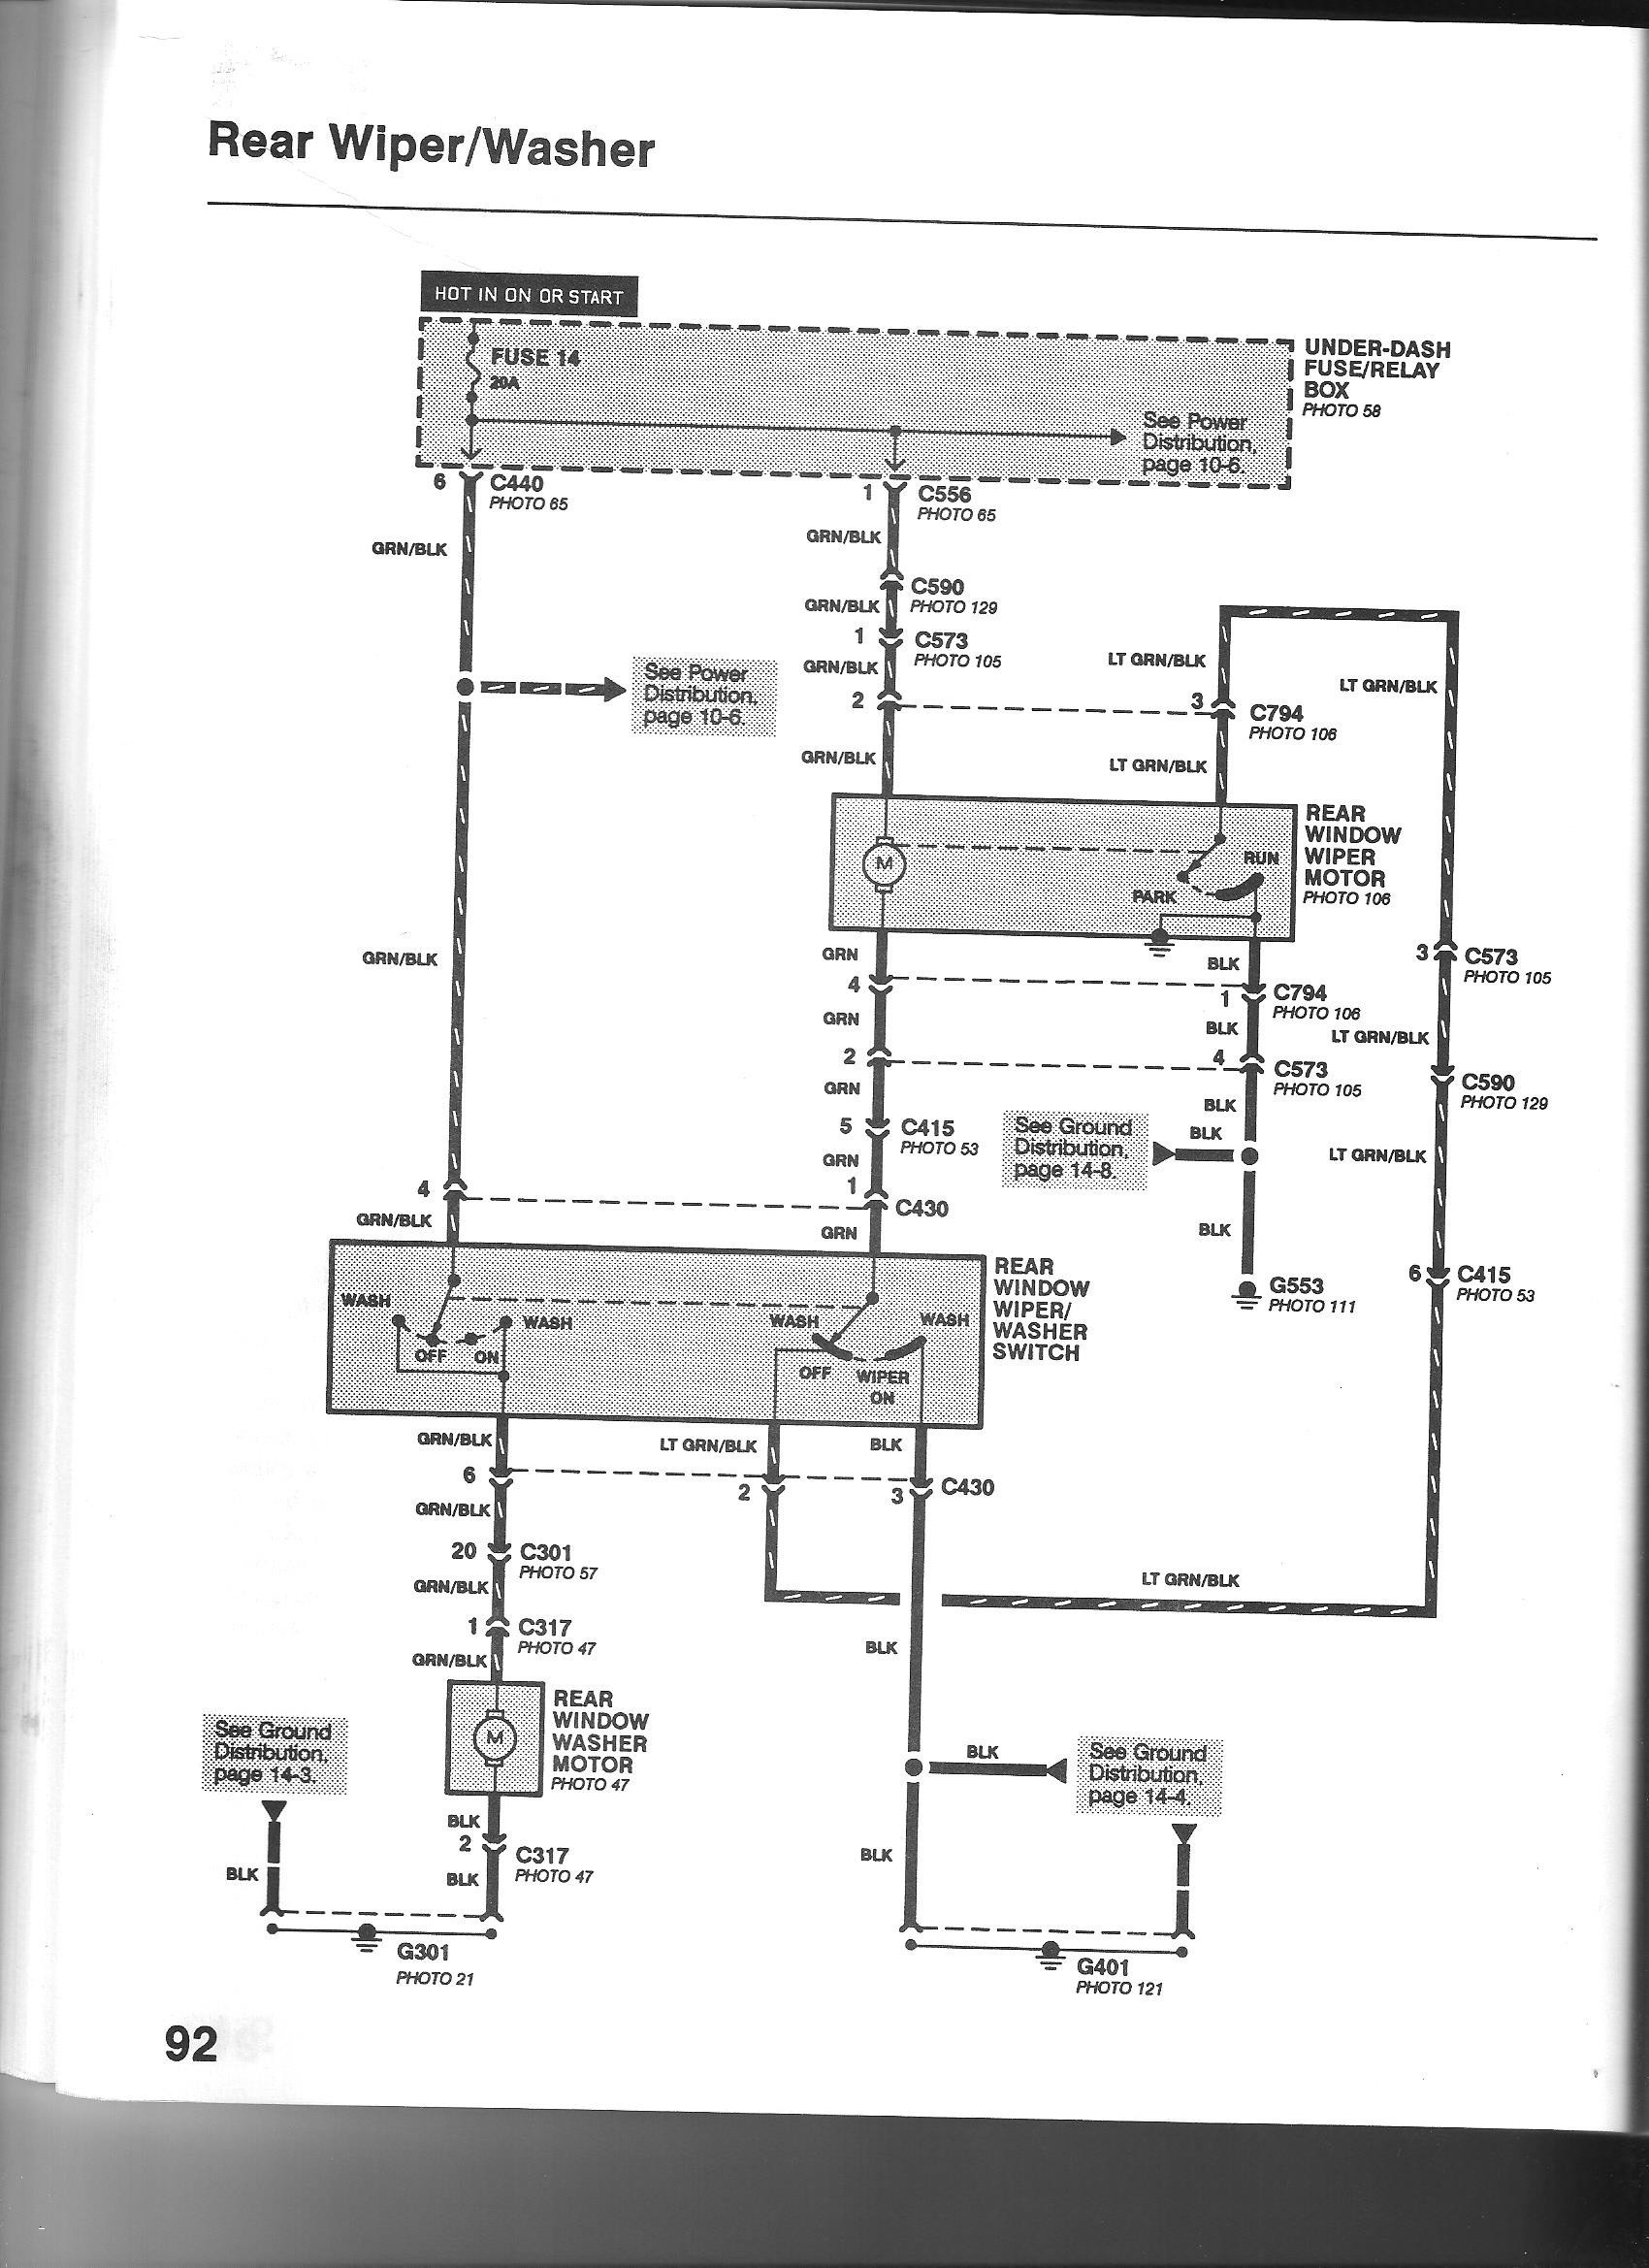 Windshield Wiper Diagram How to Wire Two Amps to Her Diagram Fresh Windshield Wiper Motor Of Windshield Wiper Diagram